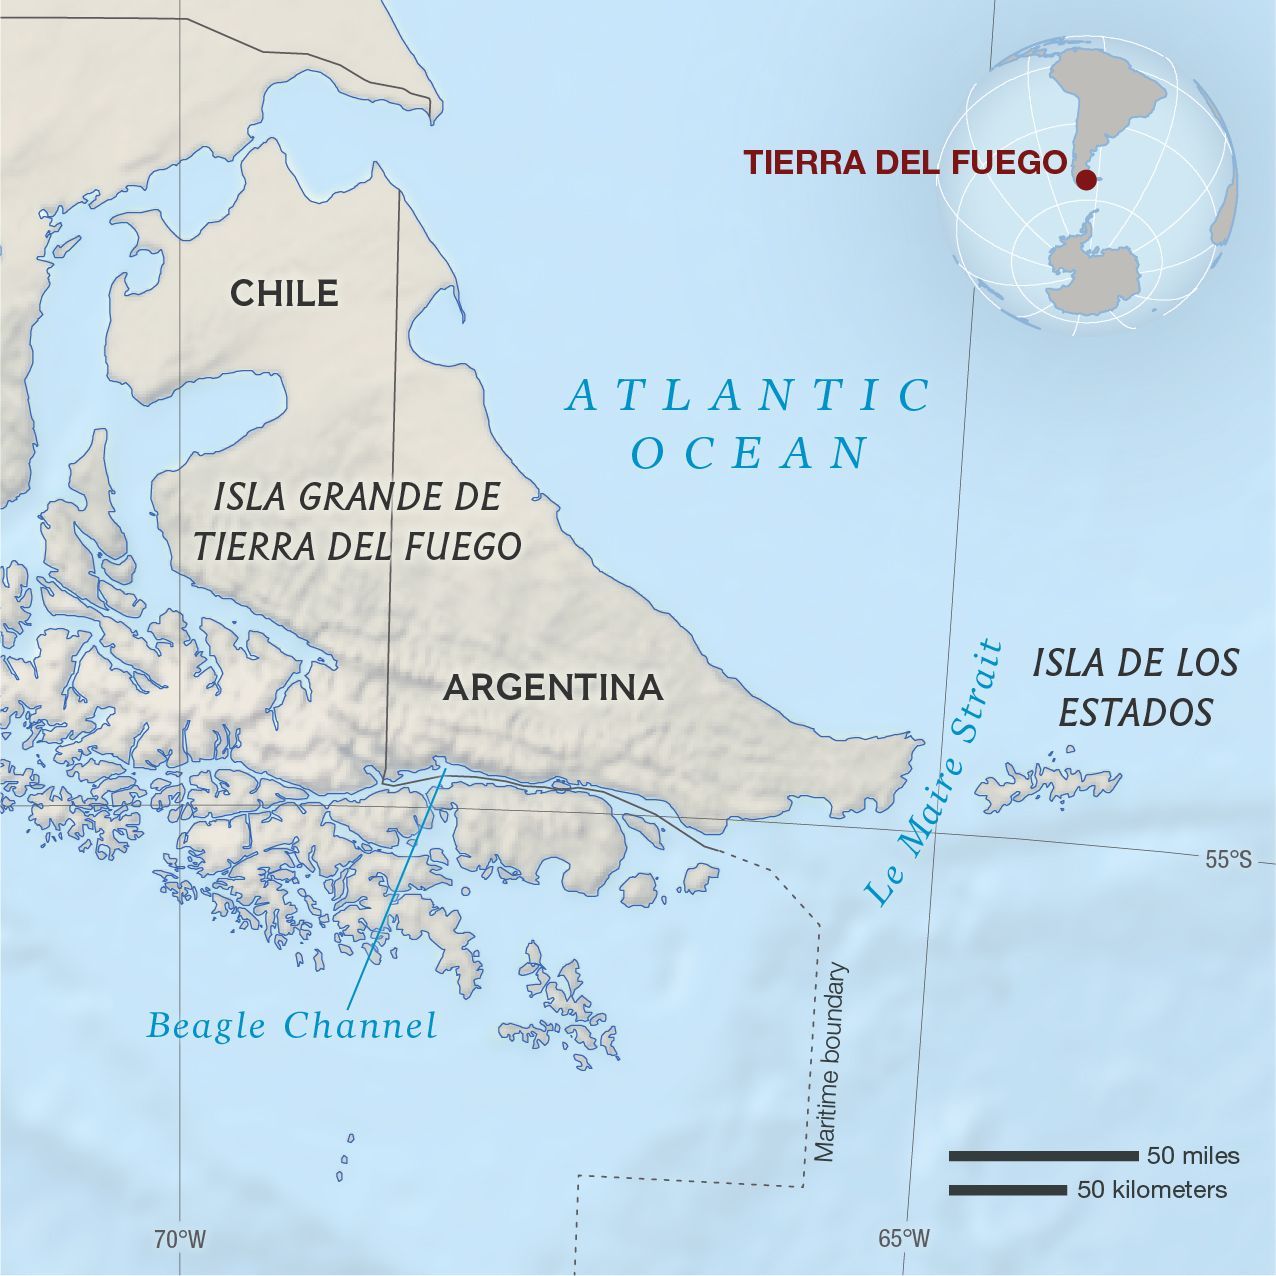 List 103+ Images water passage between the south american mainland and tierra del fuego Completed